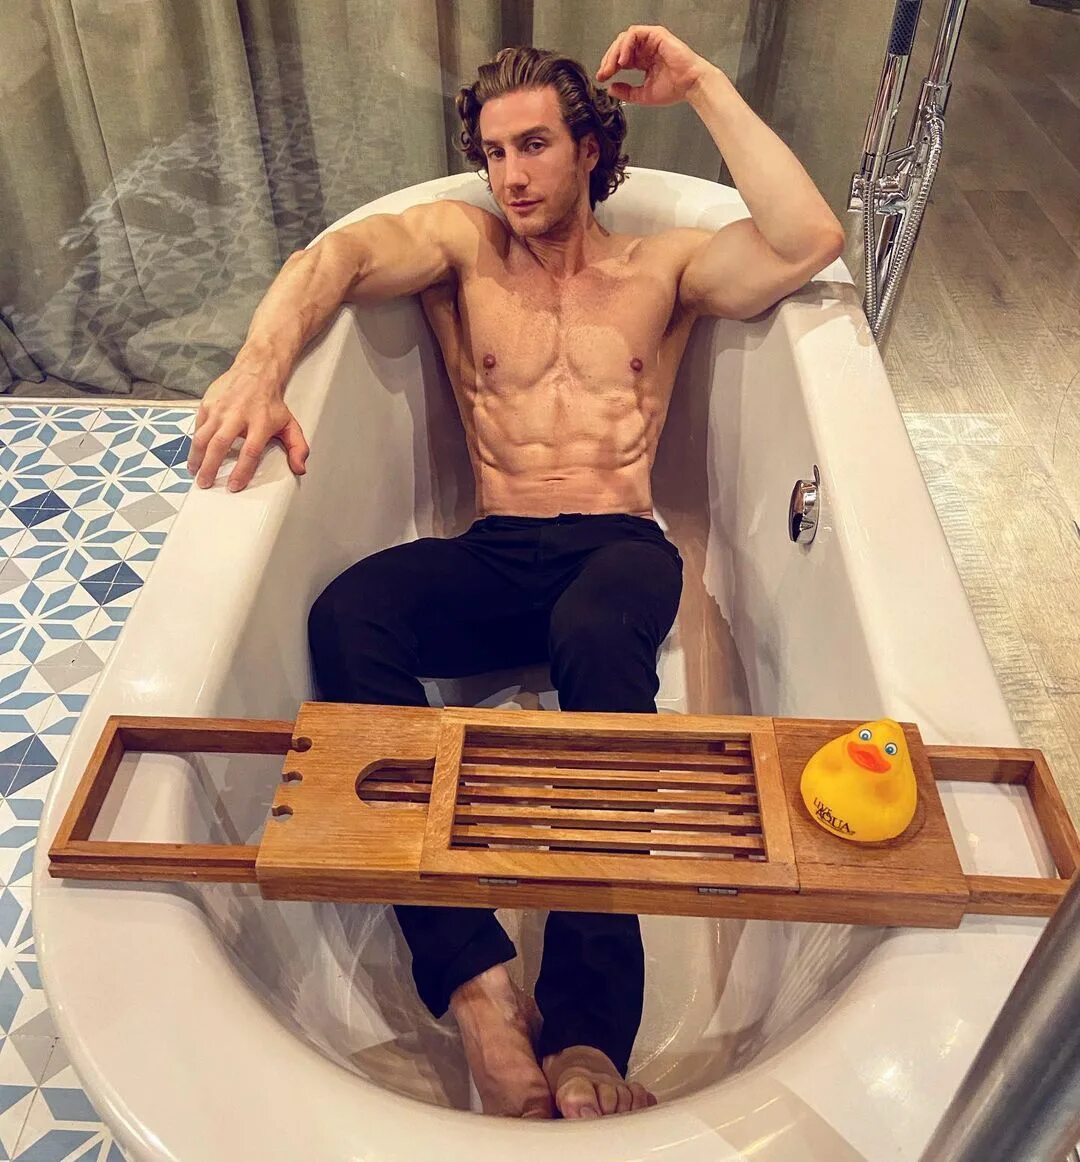 EUGENIO SILLER ⚜ on Instagram: "The phone will definitely ring if you’...